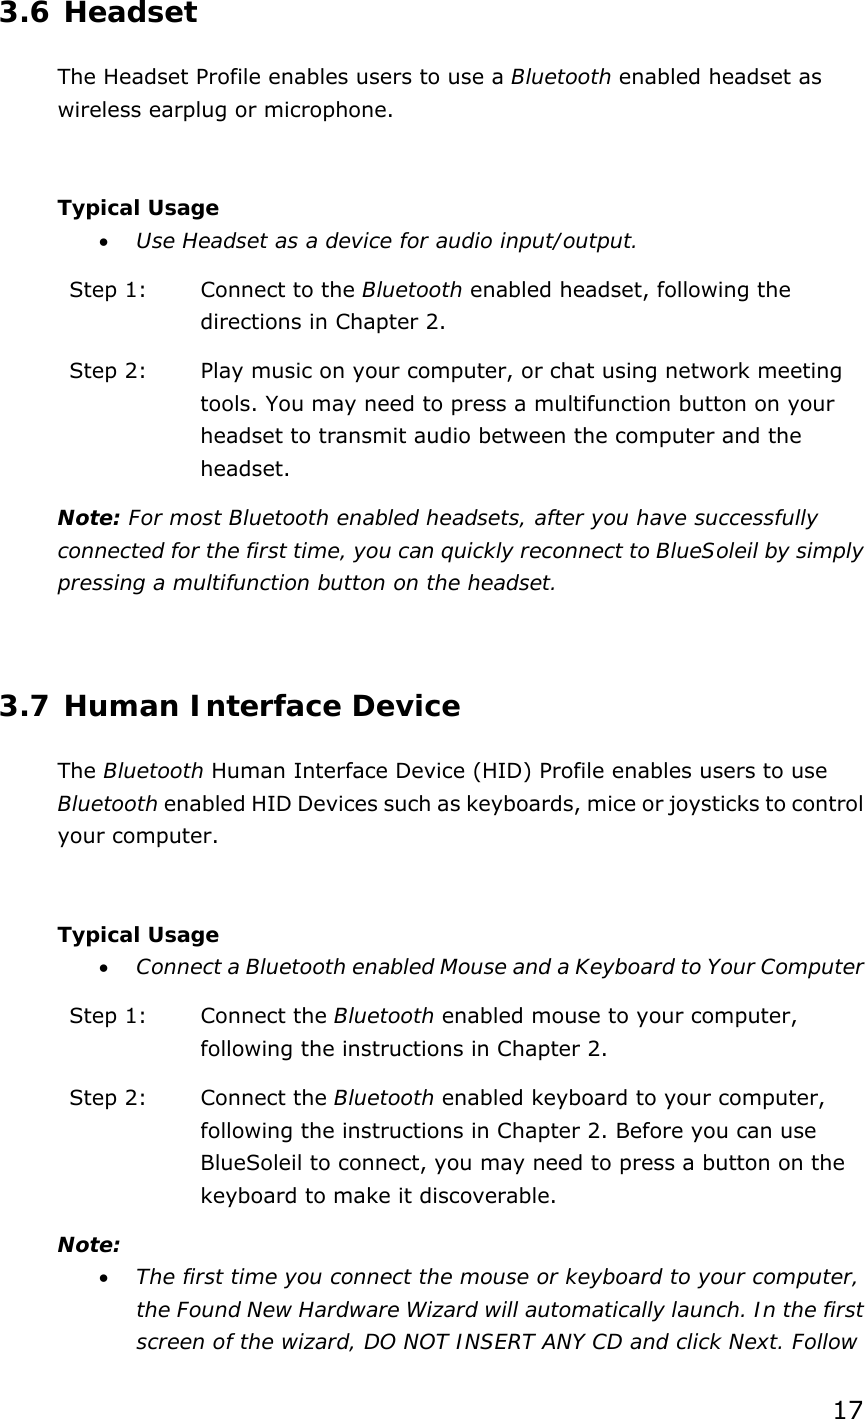 17  3.6 Headset The Headset Profile enables users to use a Bluetooth enabled headset as wireless earplug or microphone.  Typical Usage • Use Headset as a device for audio input/output. Step 1:  Connect to the Bluetooth enabled headset, following the directions in Chapter 2. Step 2:  Play music on your computer, or chat using network meeting tools. You may need to press a multifunction button on your headset to transmit audio between the computer and the headset. Note: For most Bluetooth enabled headsets, after you have successfully connected for the first time, you can quickly reconnect to BlueSoleil by simply pressing a multifunction button on the headset.  3.7 Human Interface Device The Bluetooth Human Interface Device (HID) Profile enables users to use Bluetooth enabled HID Devices such as keyboards, mice or joysticks to control your computer.  Typical Usage • Connect a Bluetooth enabled Mouse and a Keyboard to Your Computer Step 1:  Connect the Bluetooth enabled mouse to your computer, following the instructions in Chapter 2. Step 2:  Connect the Bluetooth enabled keyboard to your computer, following the instructions in Chapter 2. Before you can use BlueSoleil to connect, you may need to press a button on the keyboard to make it discoverable.   Note: • The first time you connect the mouse or keyboard to your computer, the Found New Hardware Wizard will automatically launch. In the first screen of the wizard, DO NOT INSERT ANY CD and click Next. Follow 